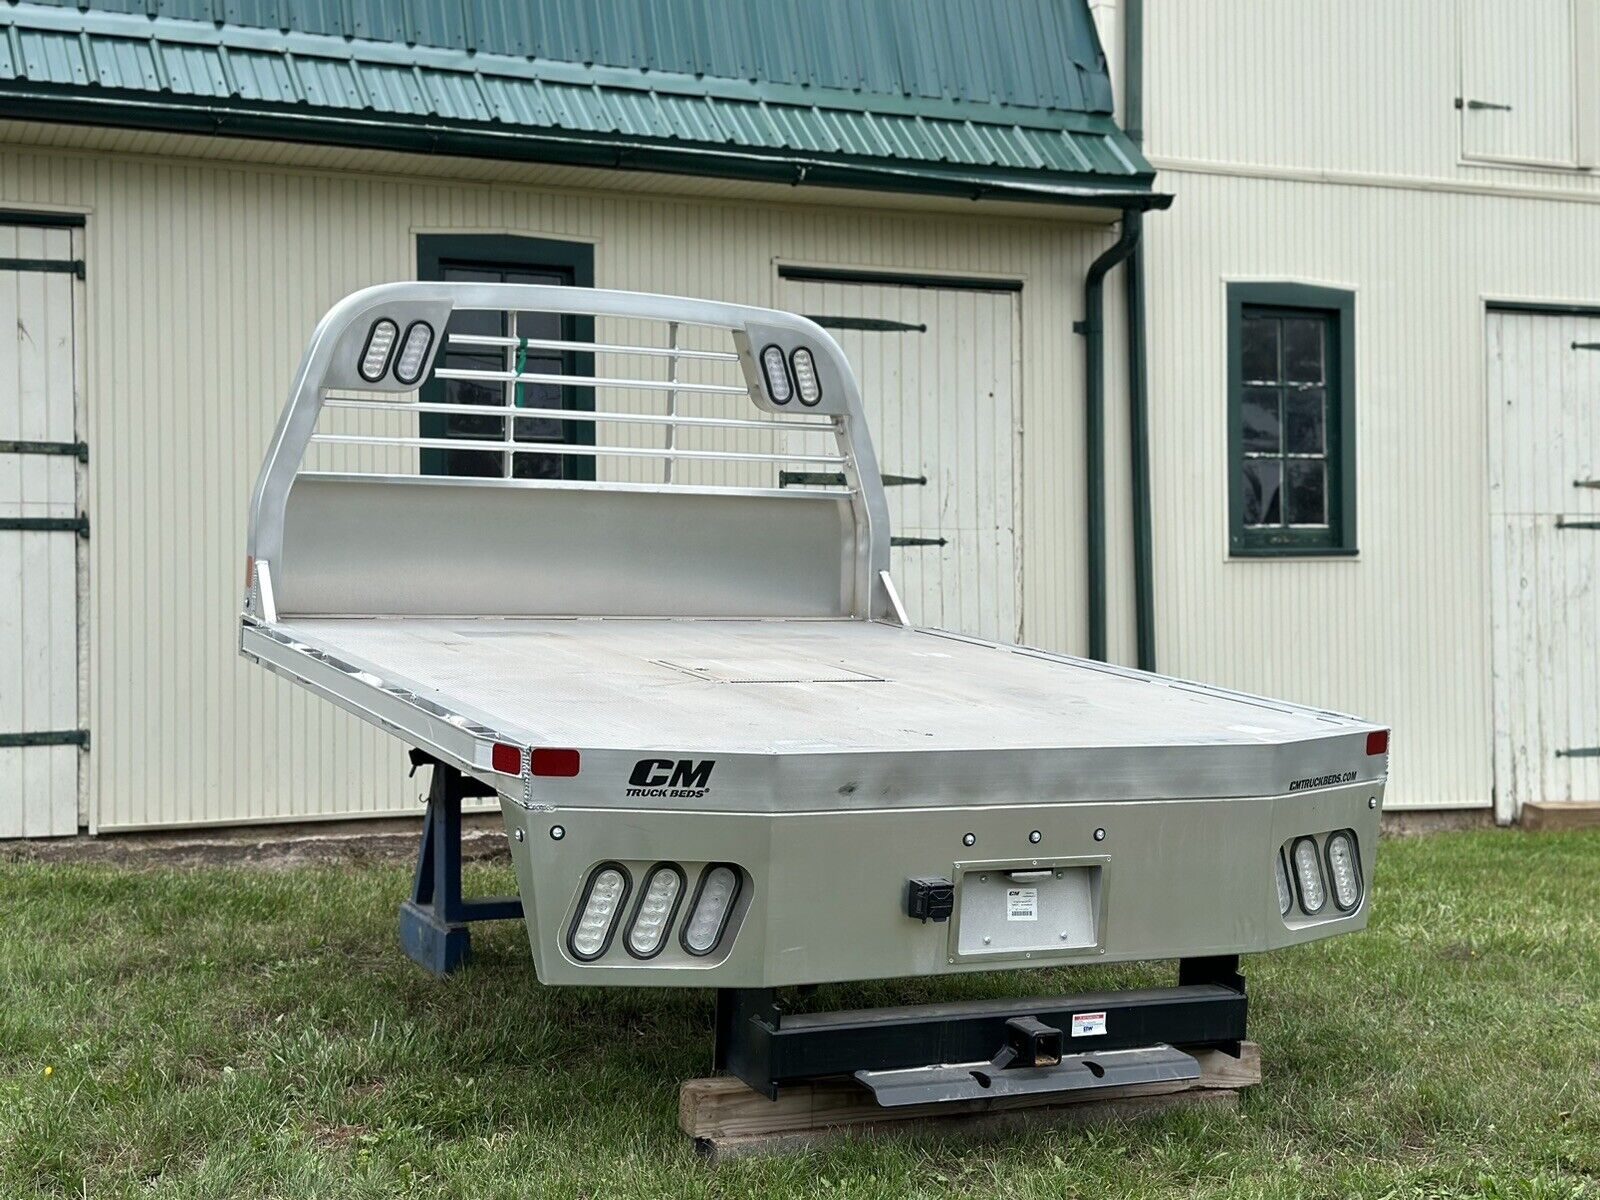 New Aluminum ALRD CM Flatbed Body, Fits: Ford, Chevy, Ram Long bed